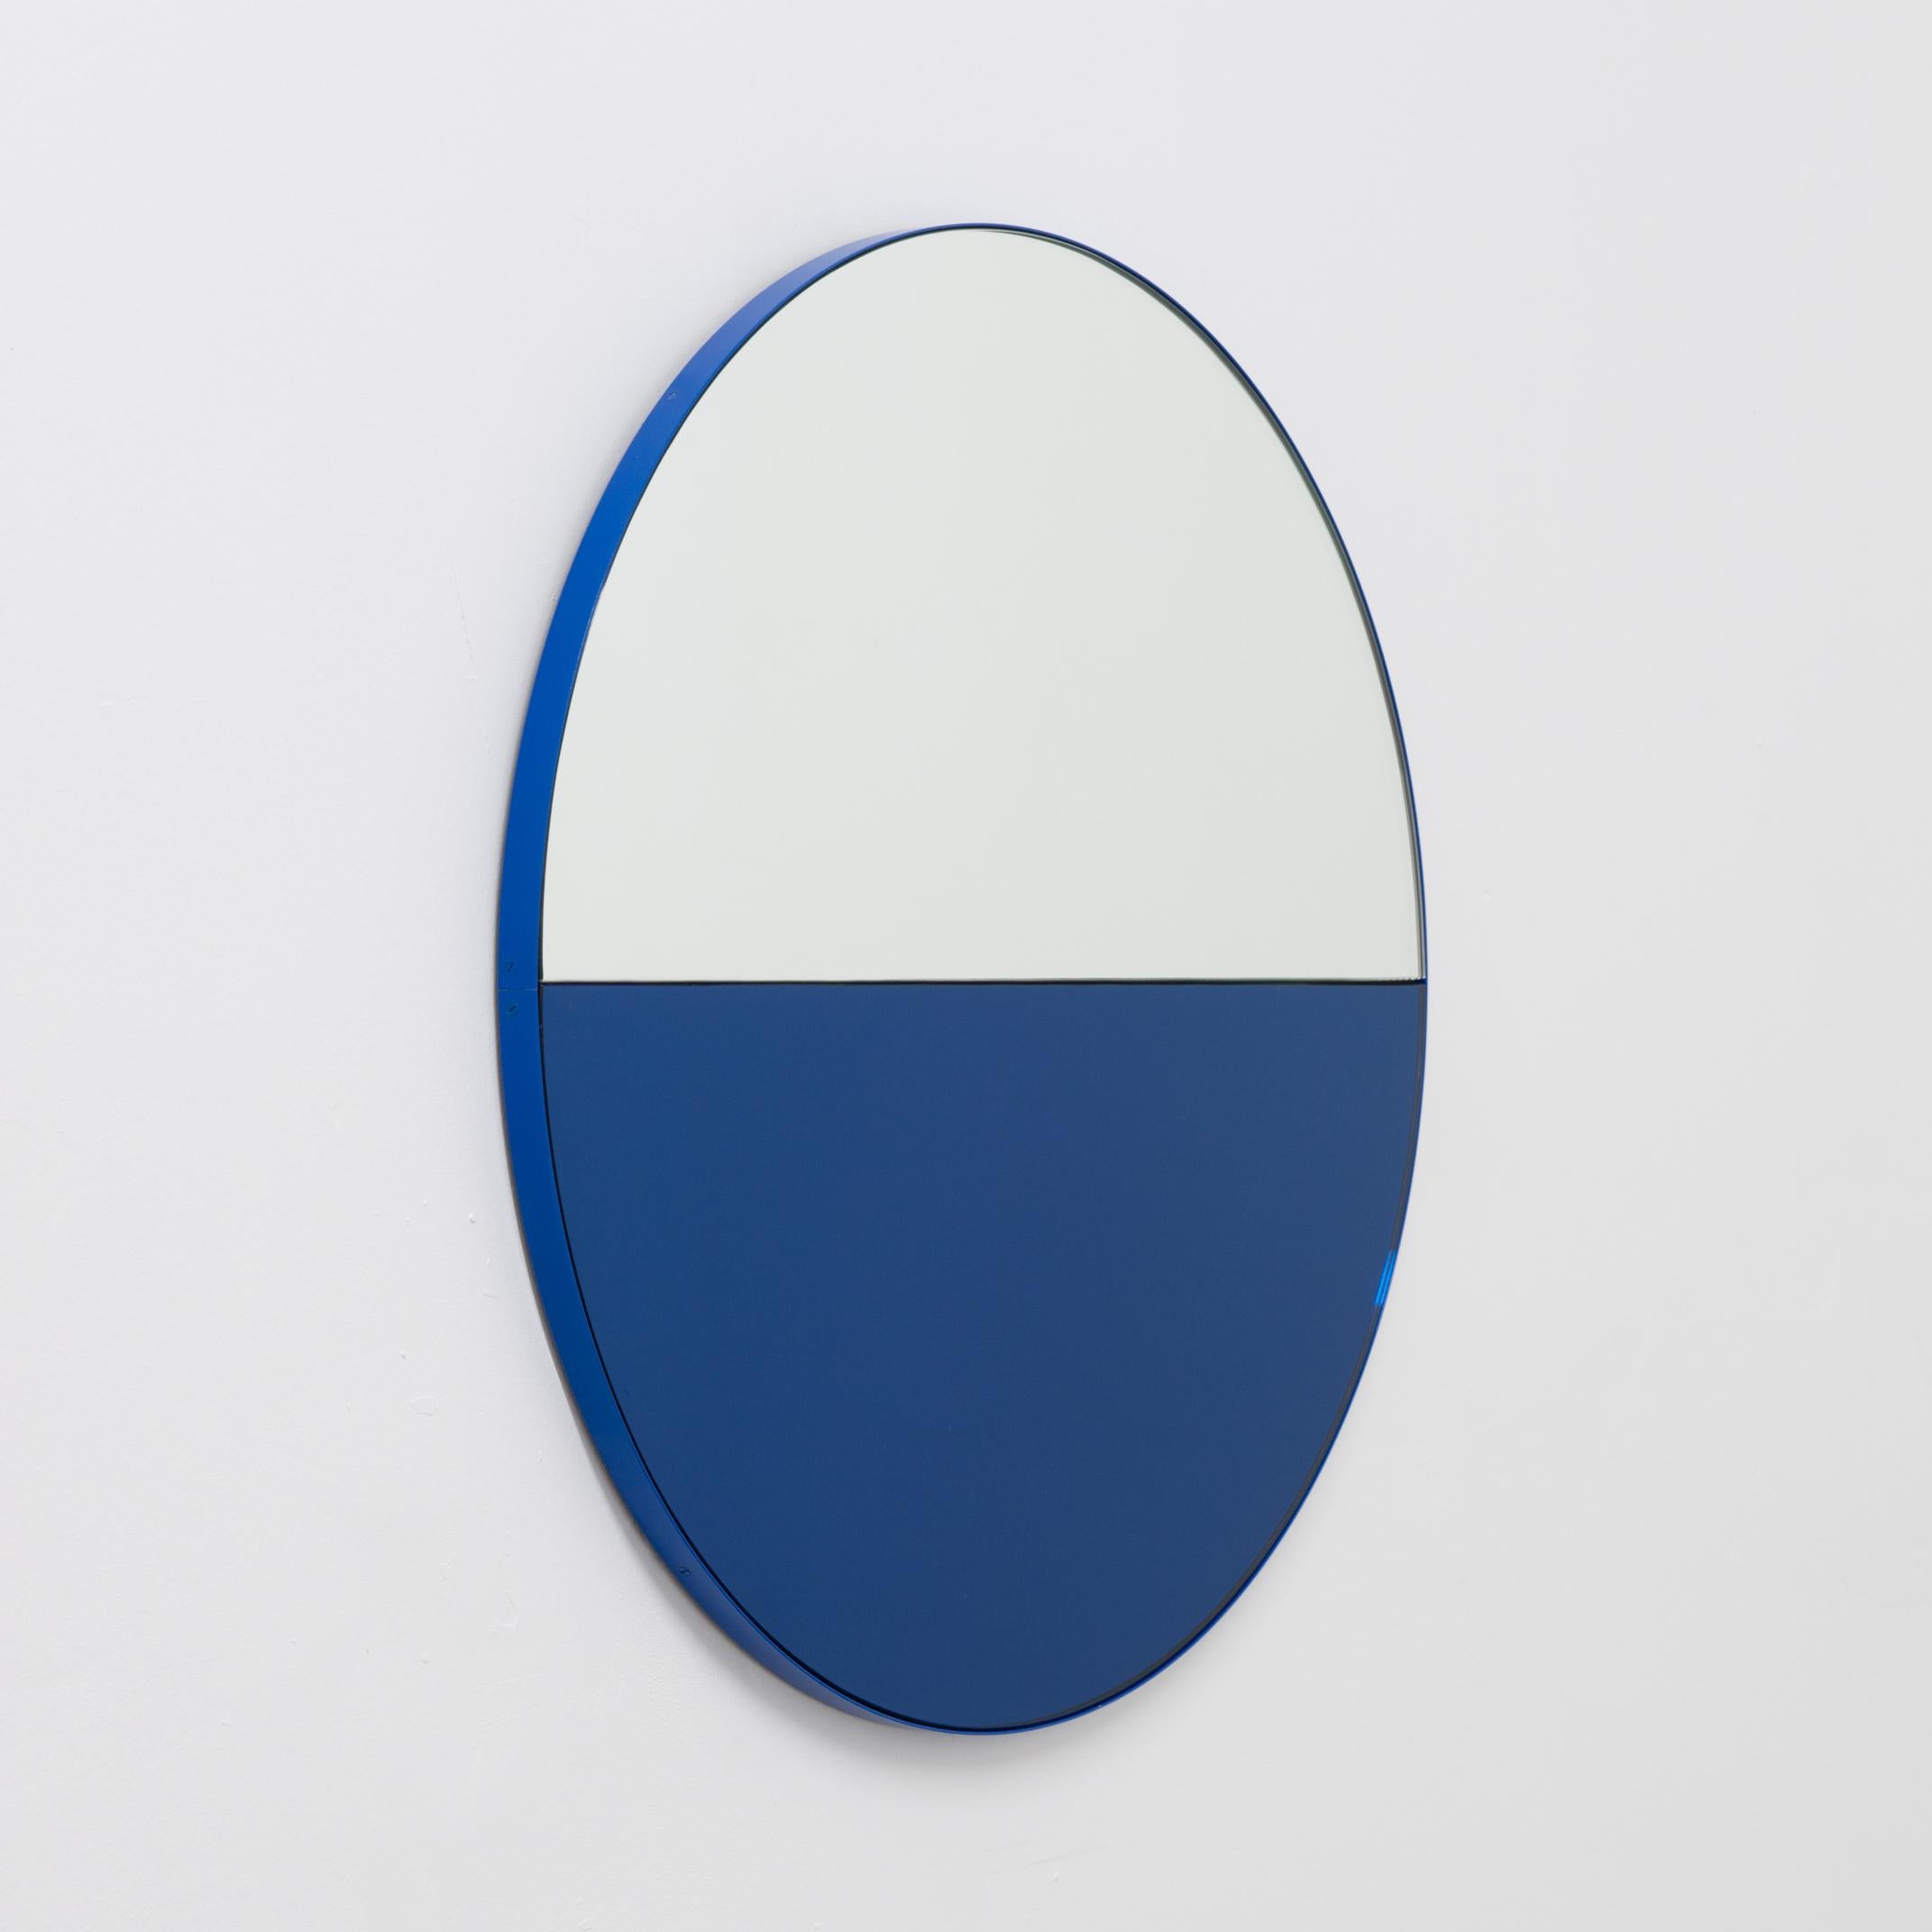 Aluminum Orbis Dualis Contemporary Blue and Silver Round Mirror with Blue Frame, Large For Sale